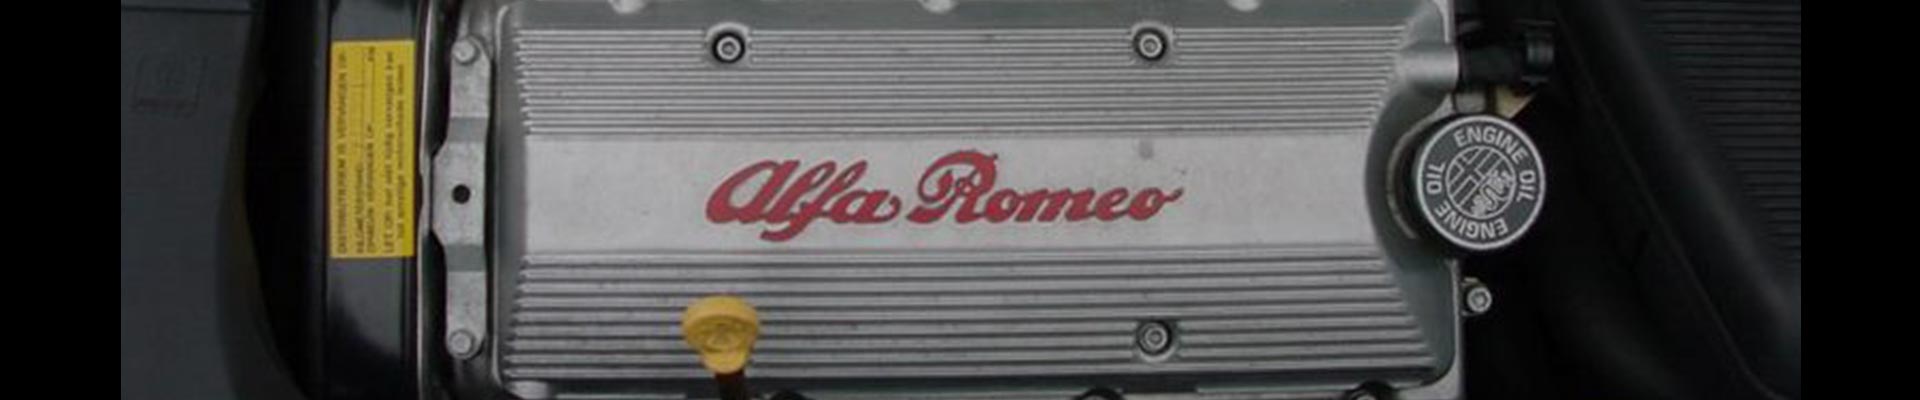 Shop Replacement 1984 Alfa Romeo Spider Parts with Discounted Price on the Net